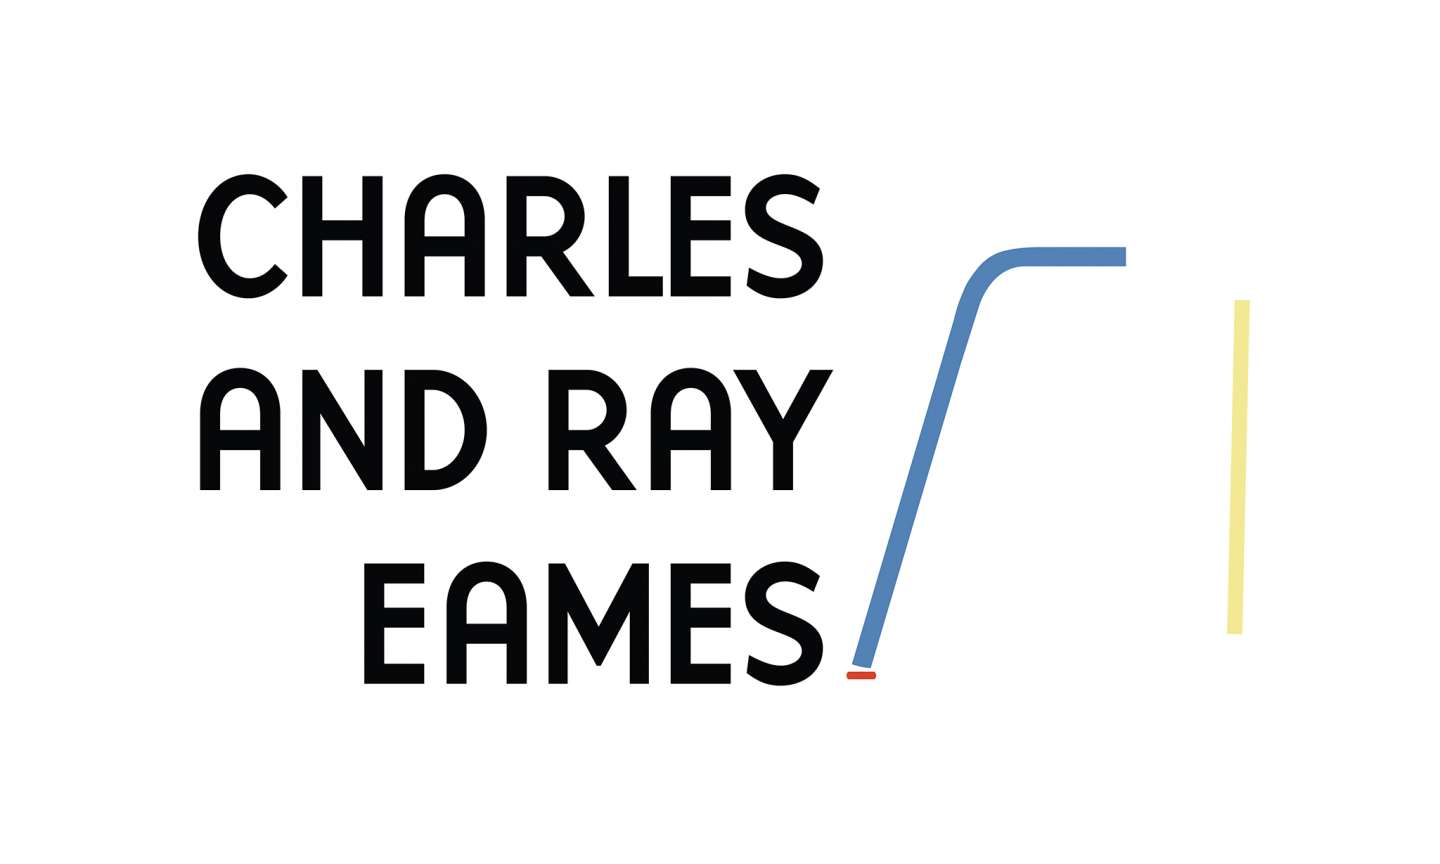 CHARLES AND RAY EXHIBITION